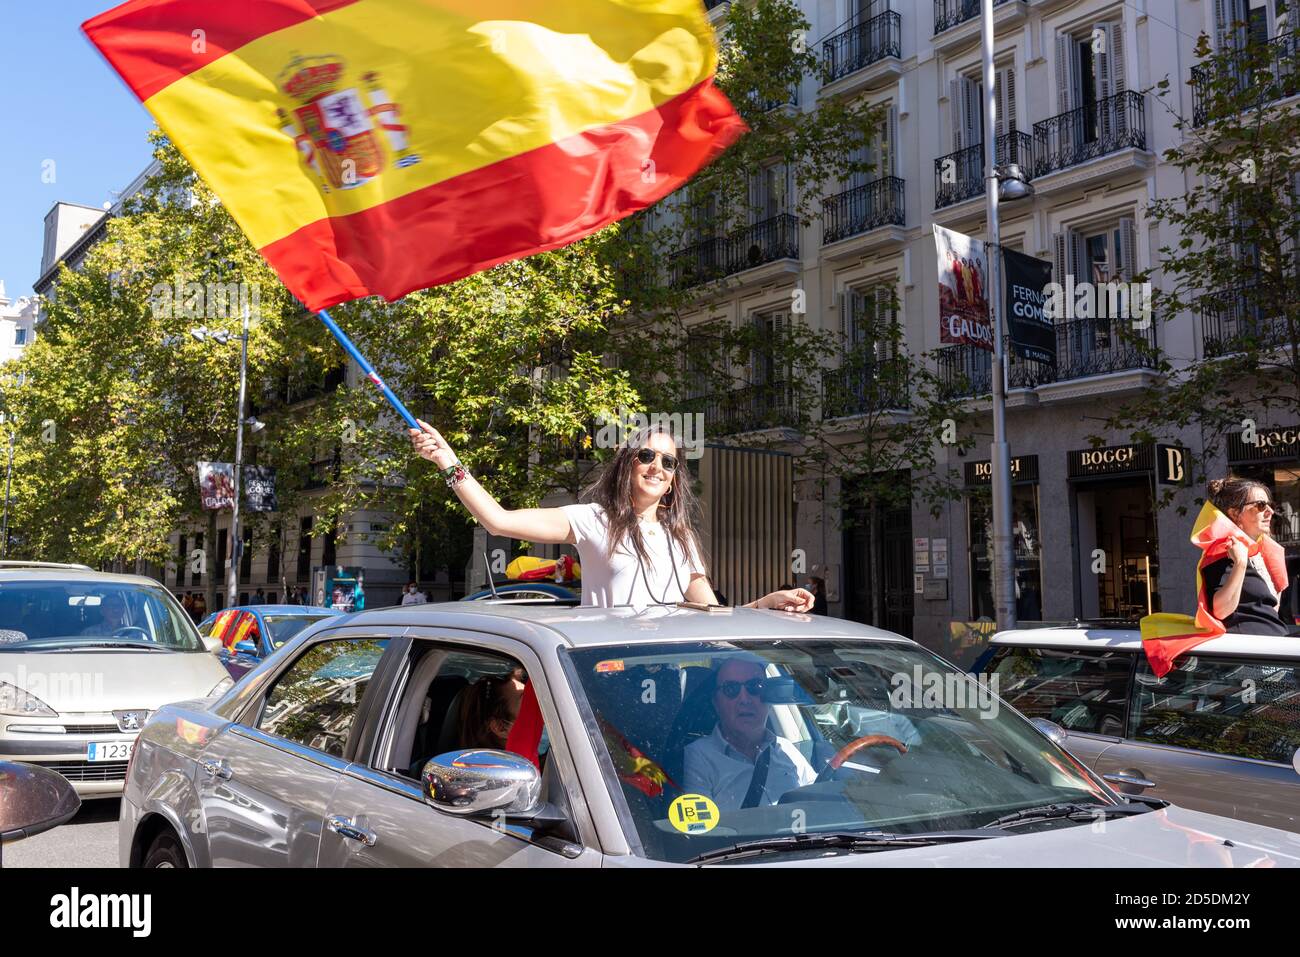 Madrid, Spain, 12th oct 2020. Girl waving flag as she attends a car parade protest against Spanish government's handling of the COVID-19 crisis. Stock Photo